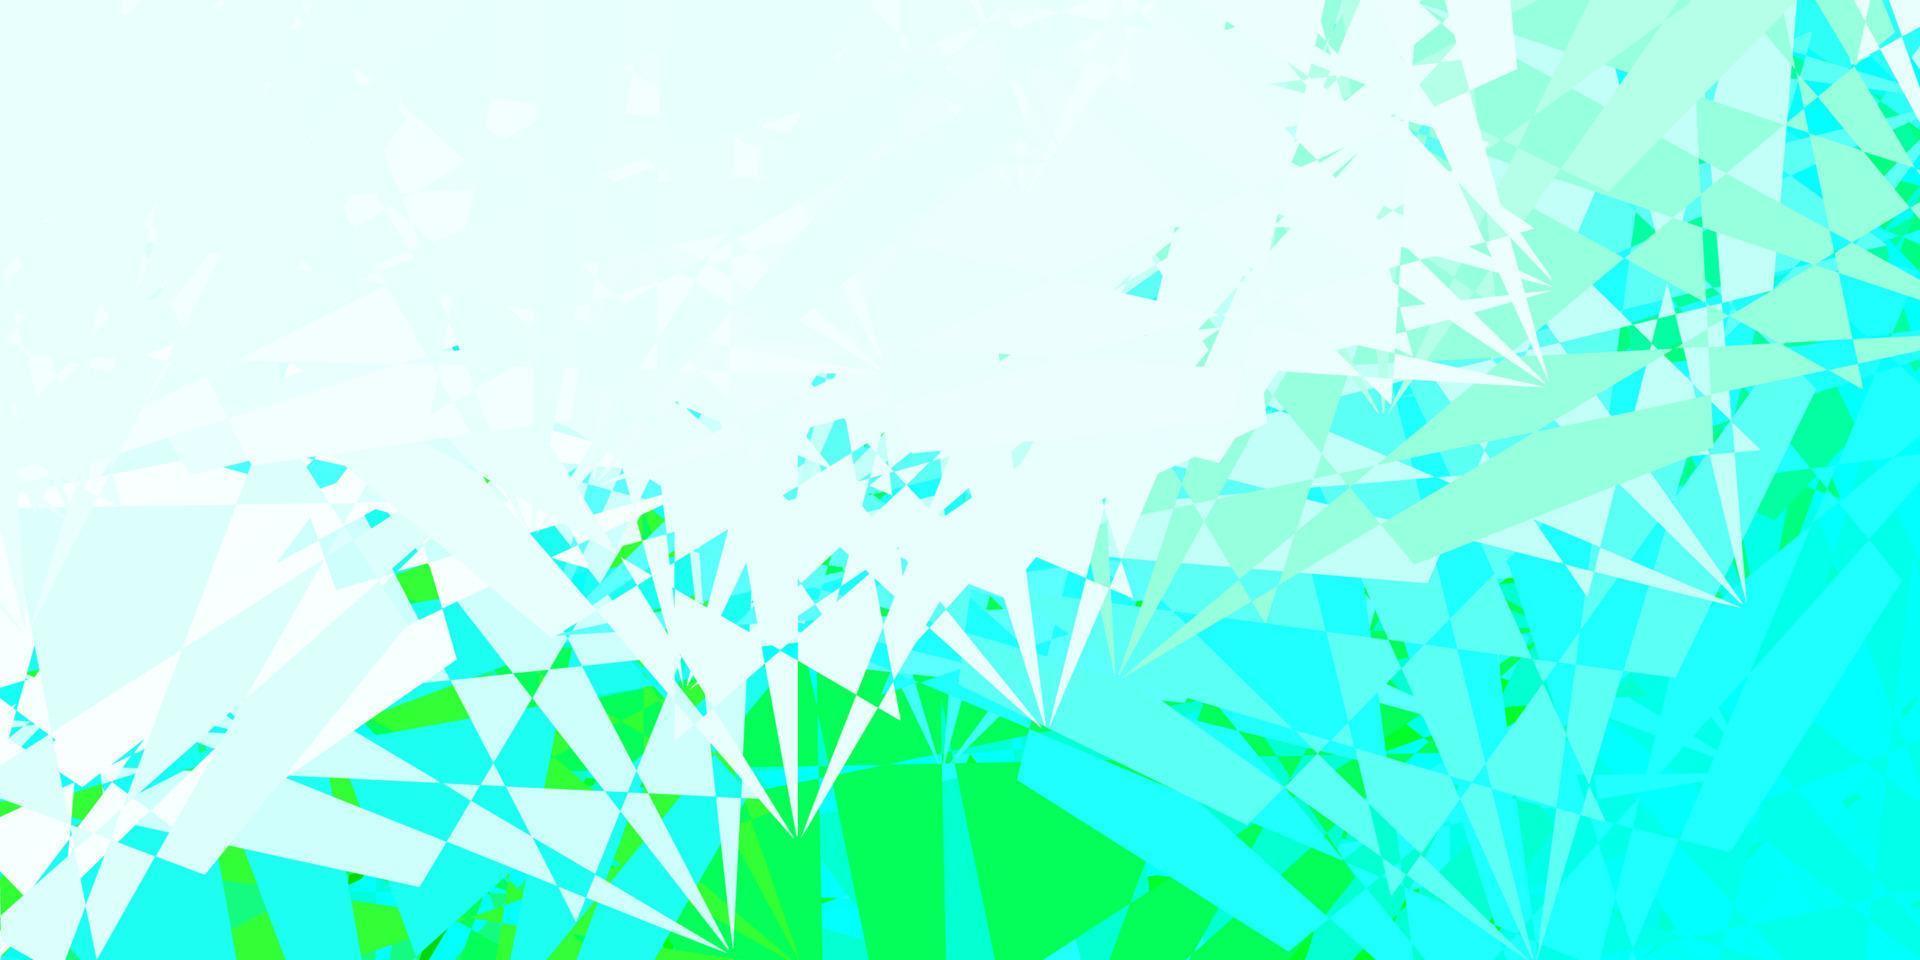 Light Blue, Green vector background with polygonal forms.